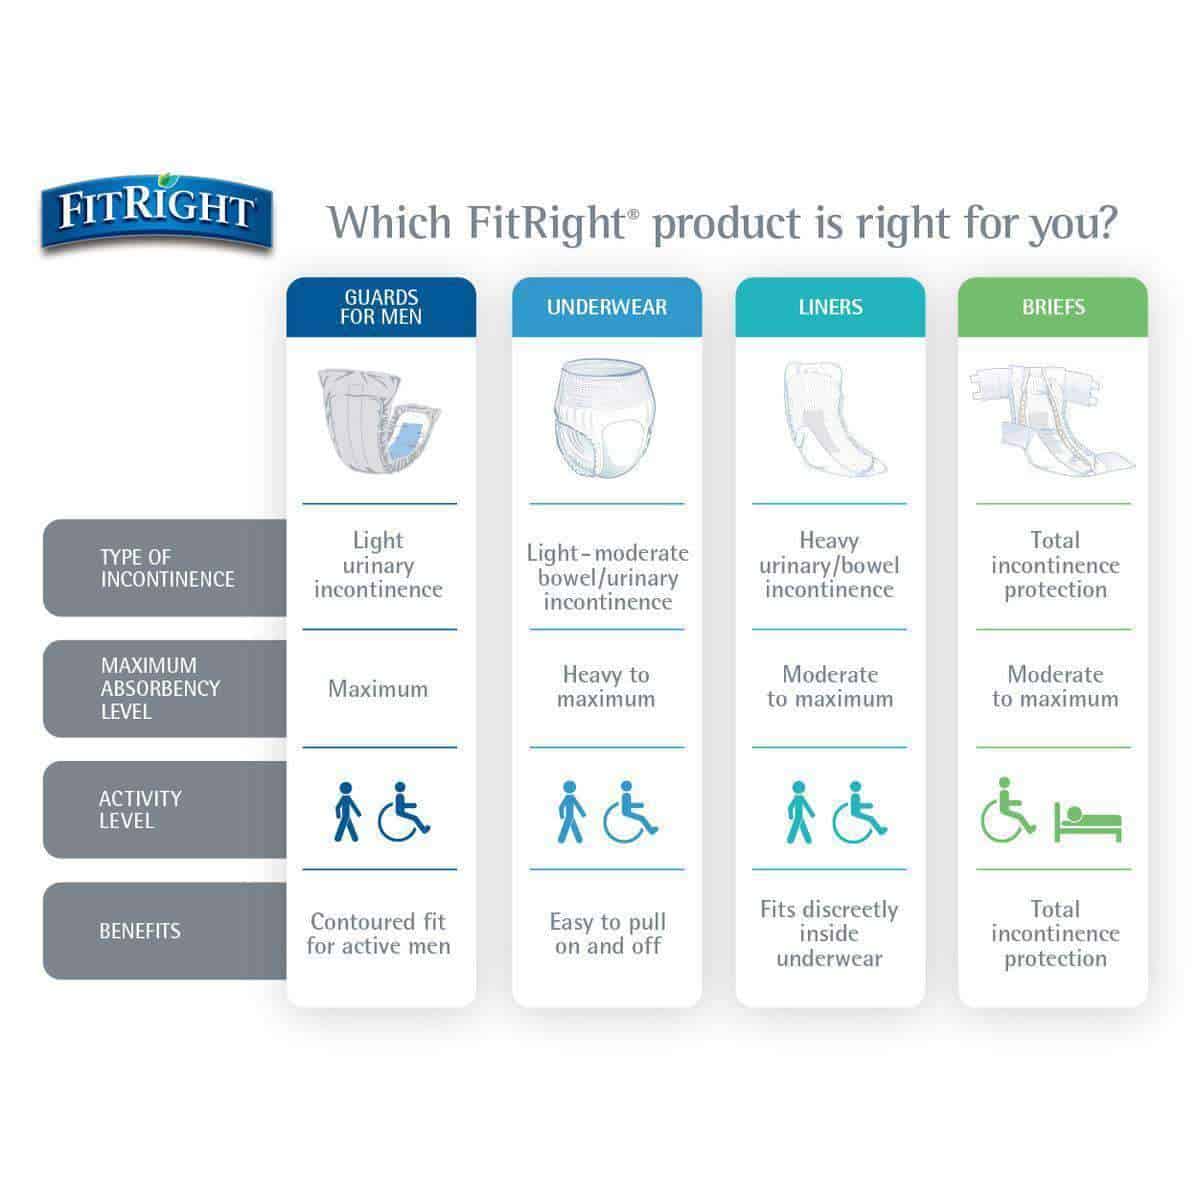 FitRight Active Male Incontinence Guards - Maximum Absorbency  Case of 208 - Senior.com Incontinence